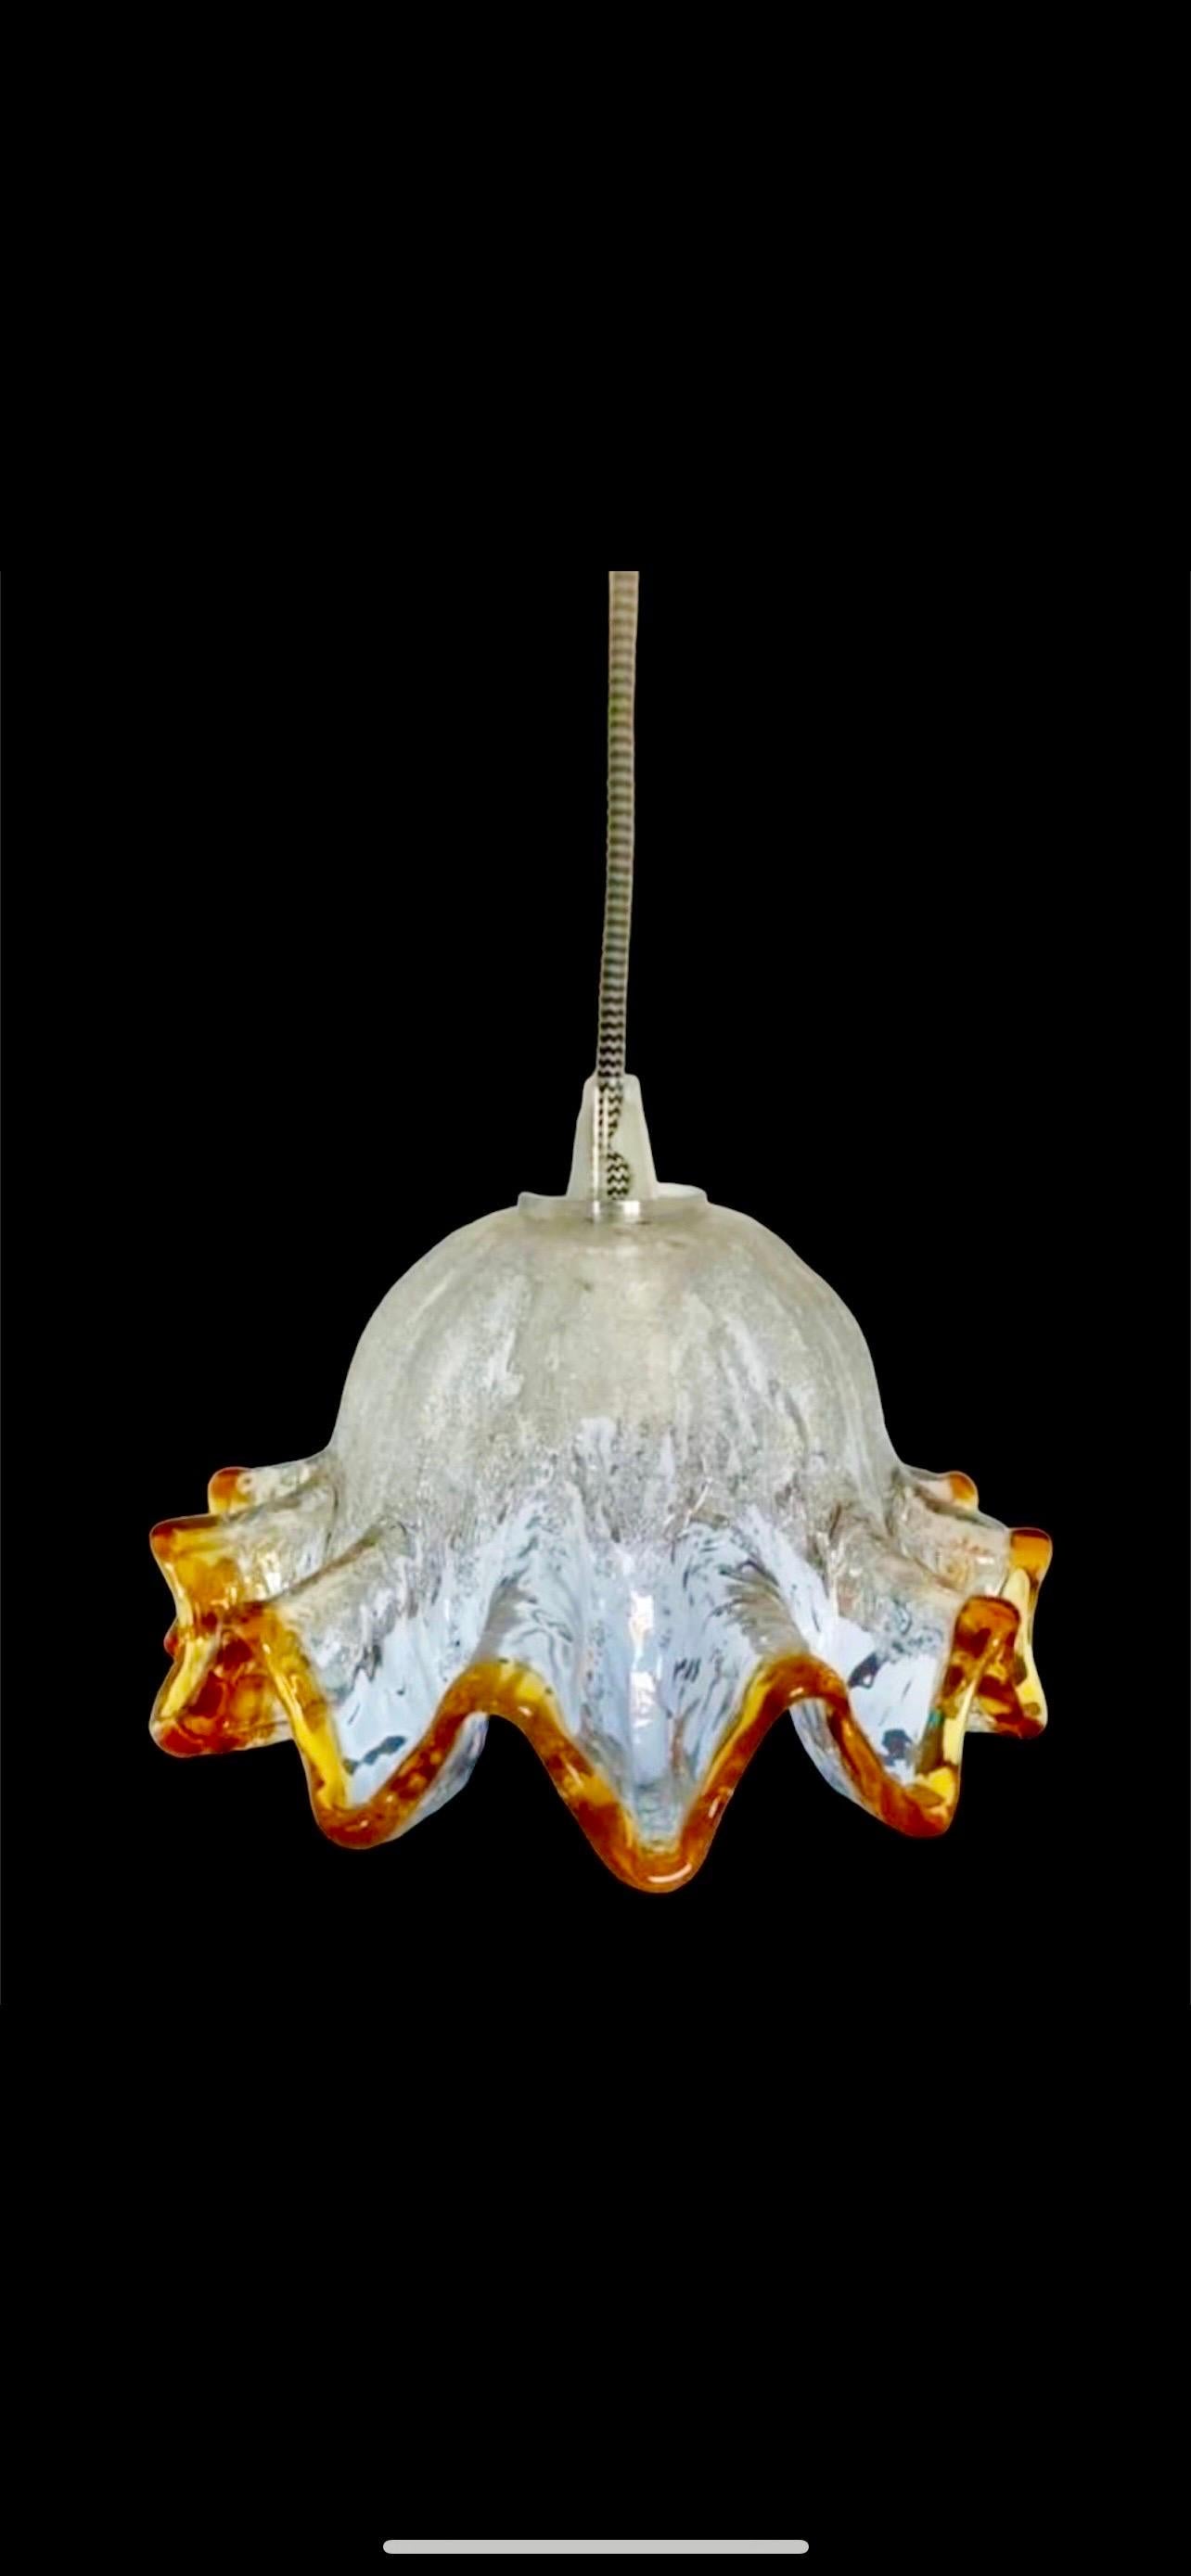 Exceptional Mazzega pendant, bicolore of glass Murano with structure. The Design and the quality of the glass make this piece the best of the Italian Design. This unique Mazzega globe in glass murano are exceptional.

 This Pieces of Arts glass show